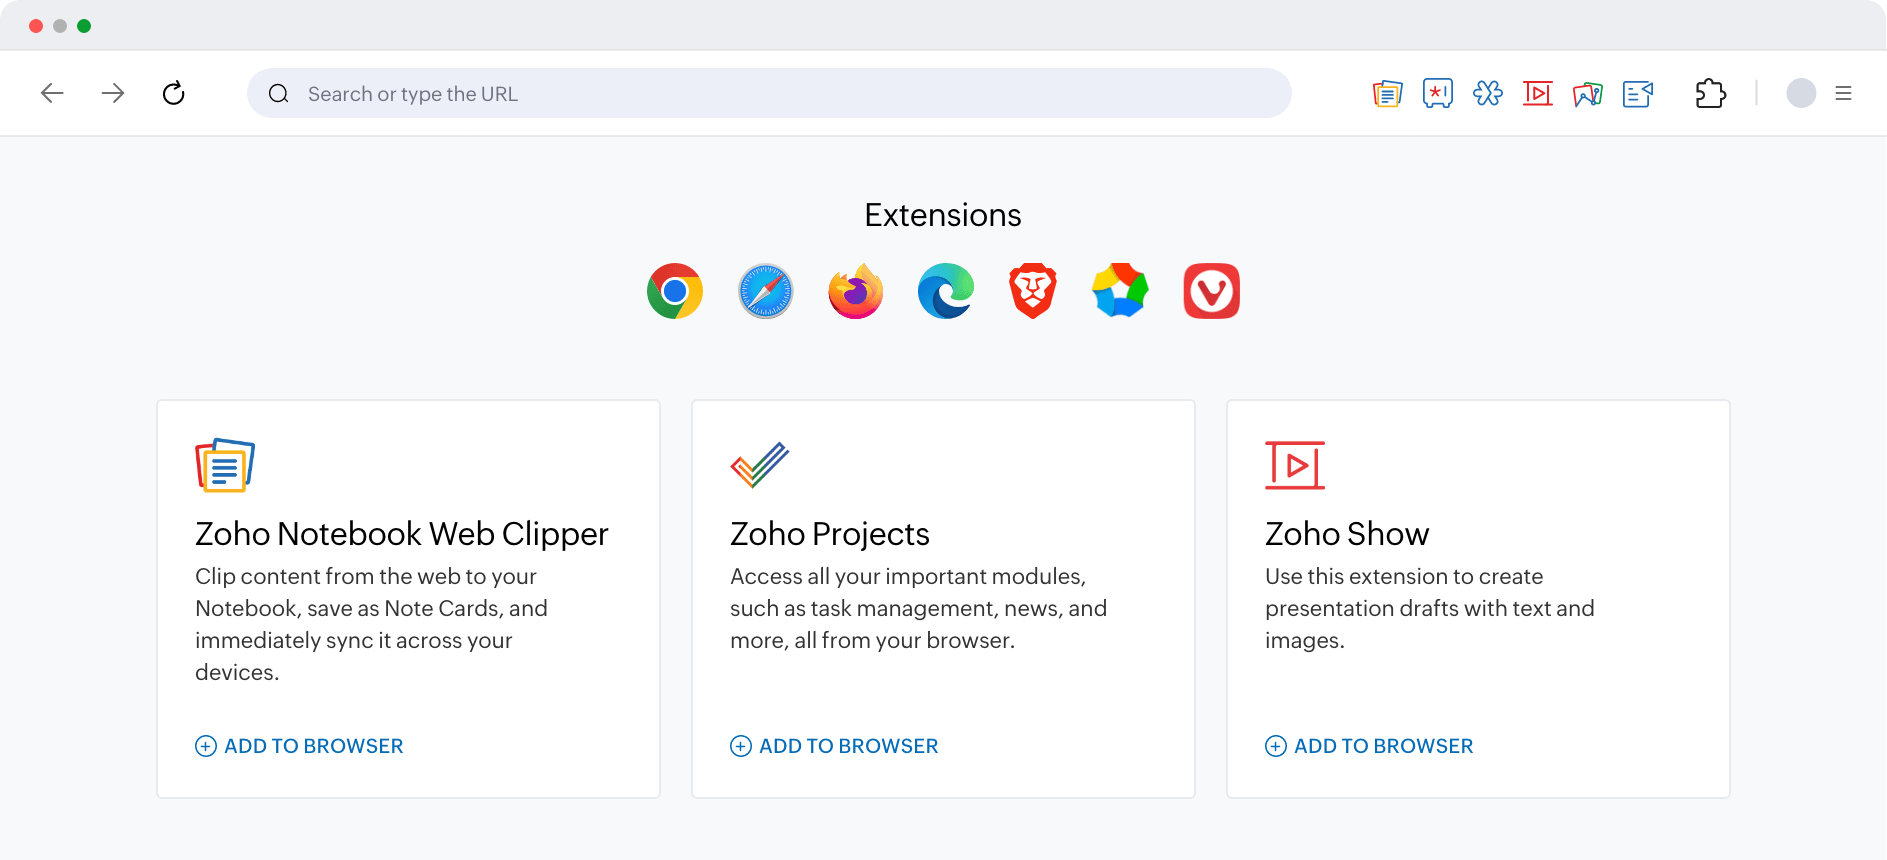 Zoho browser extensions